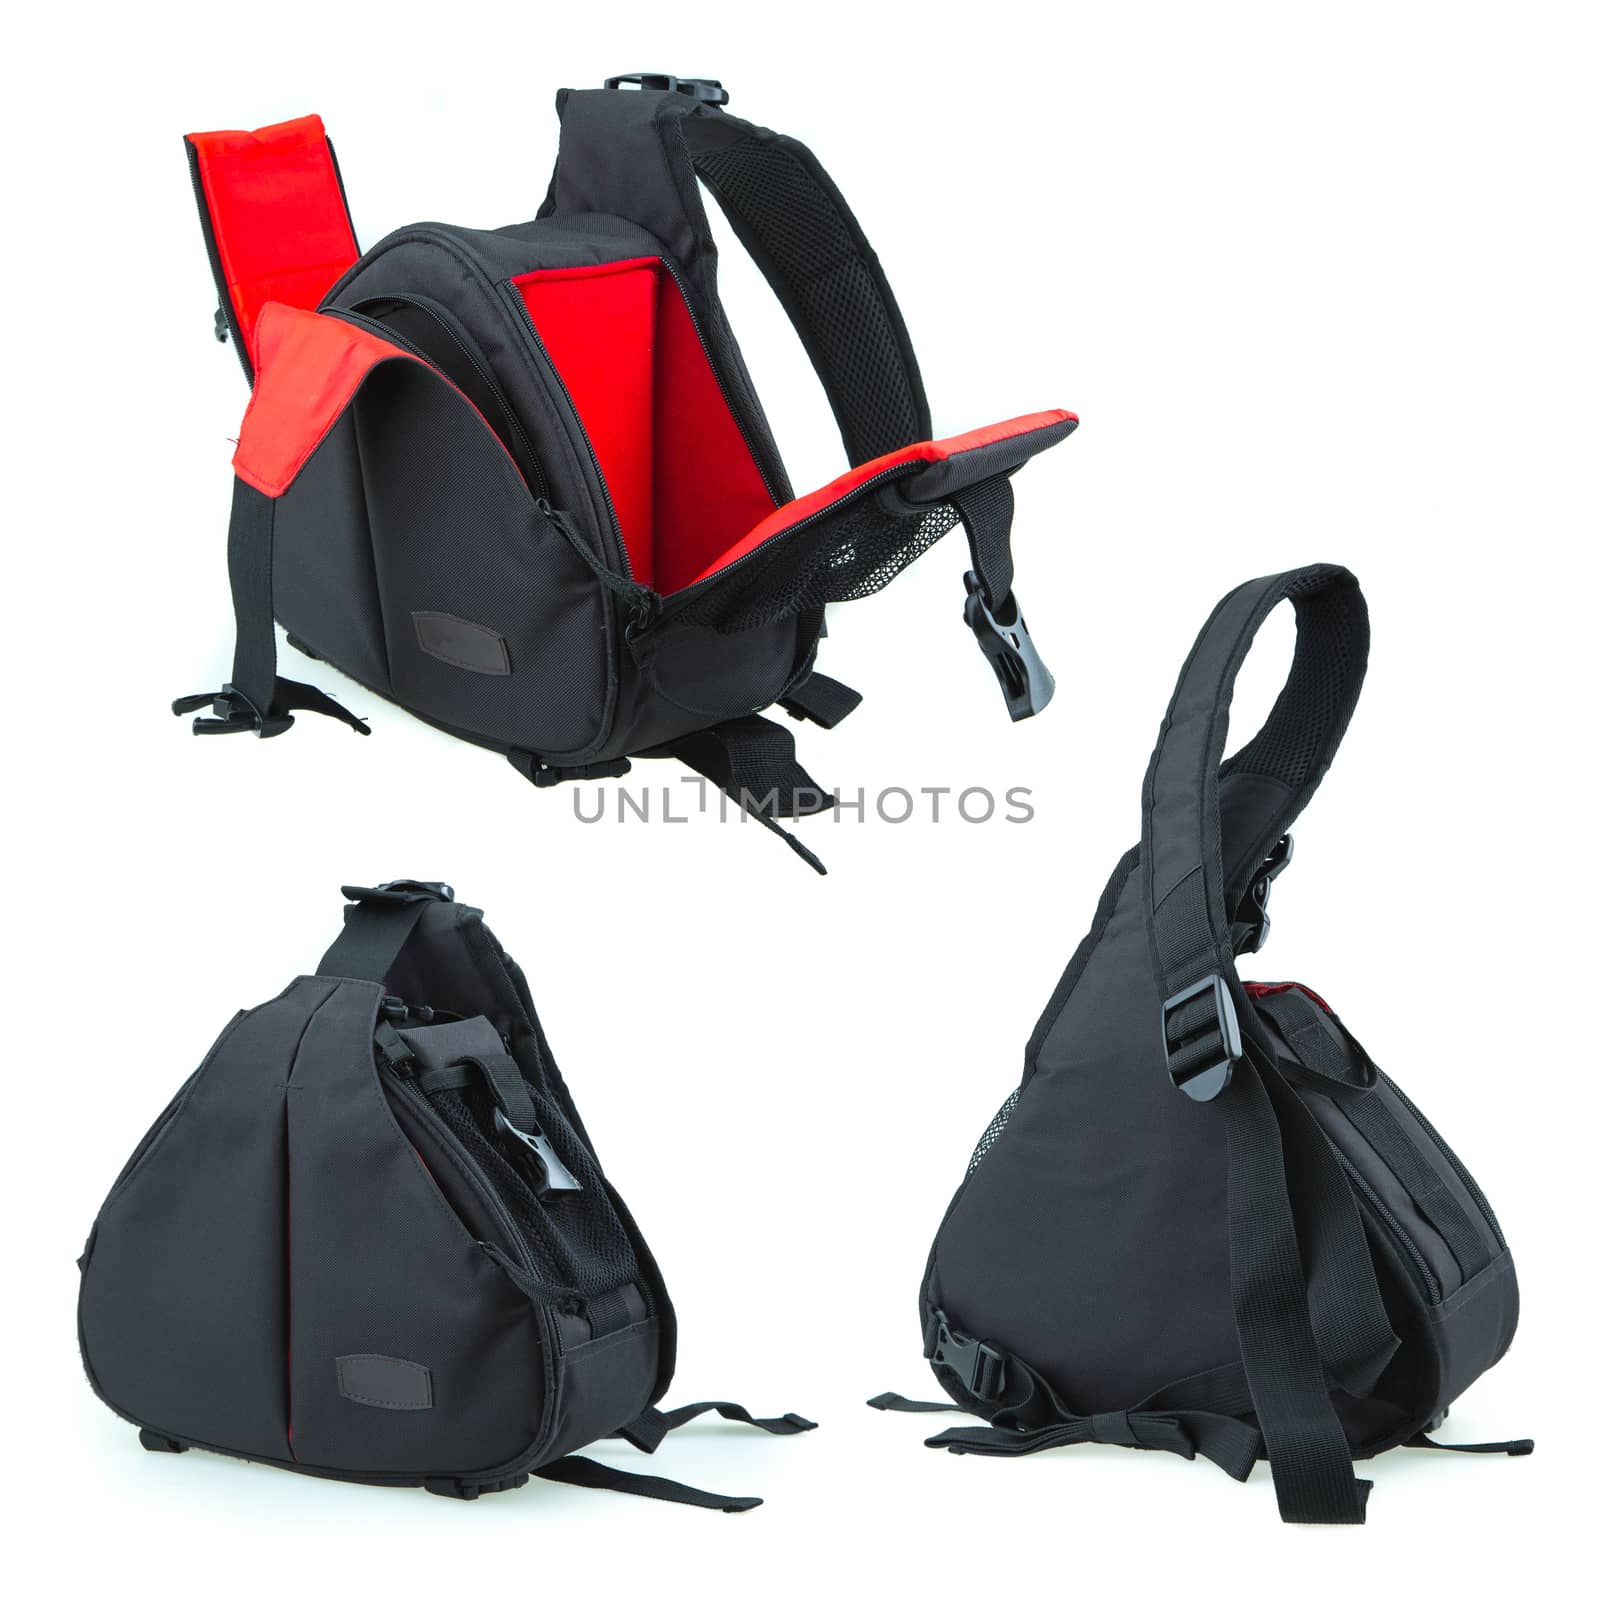 Black Backpack isolated in white background